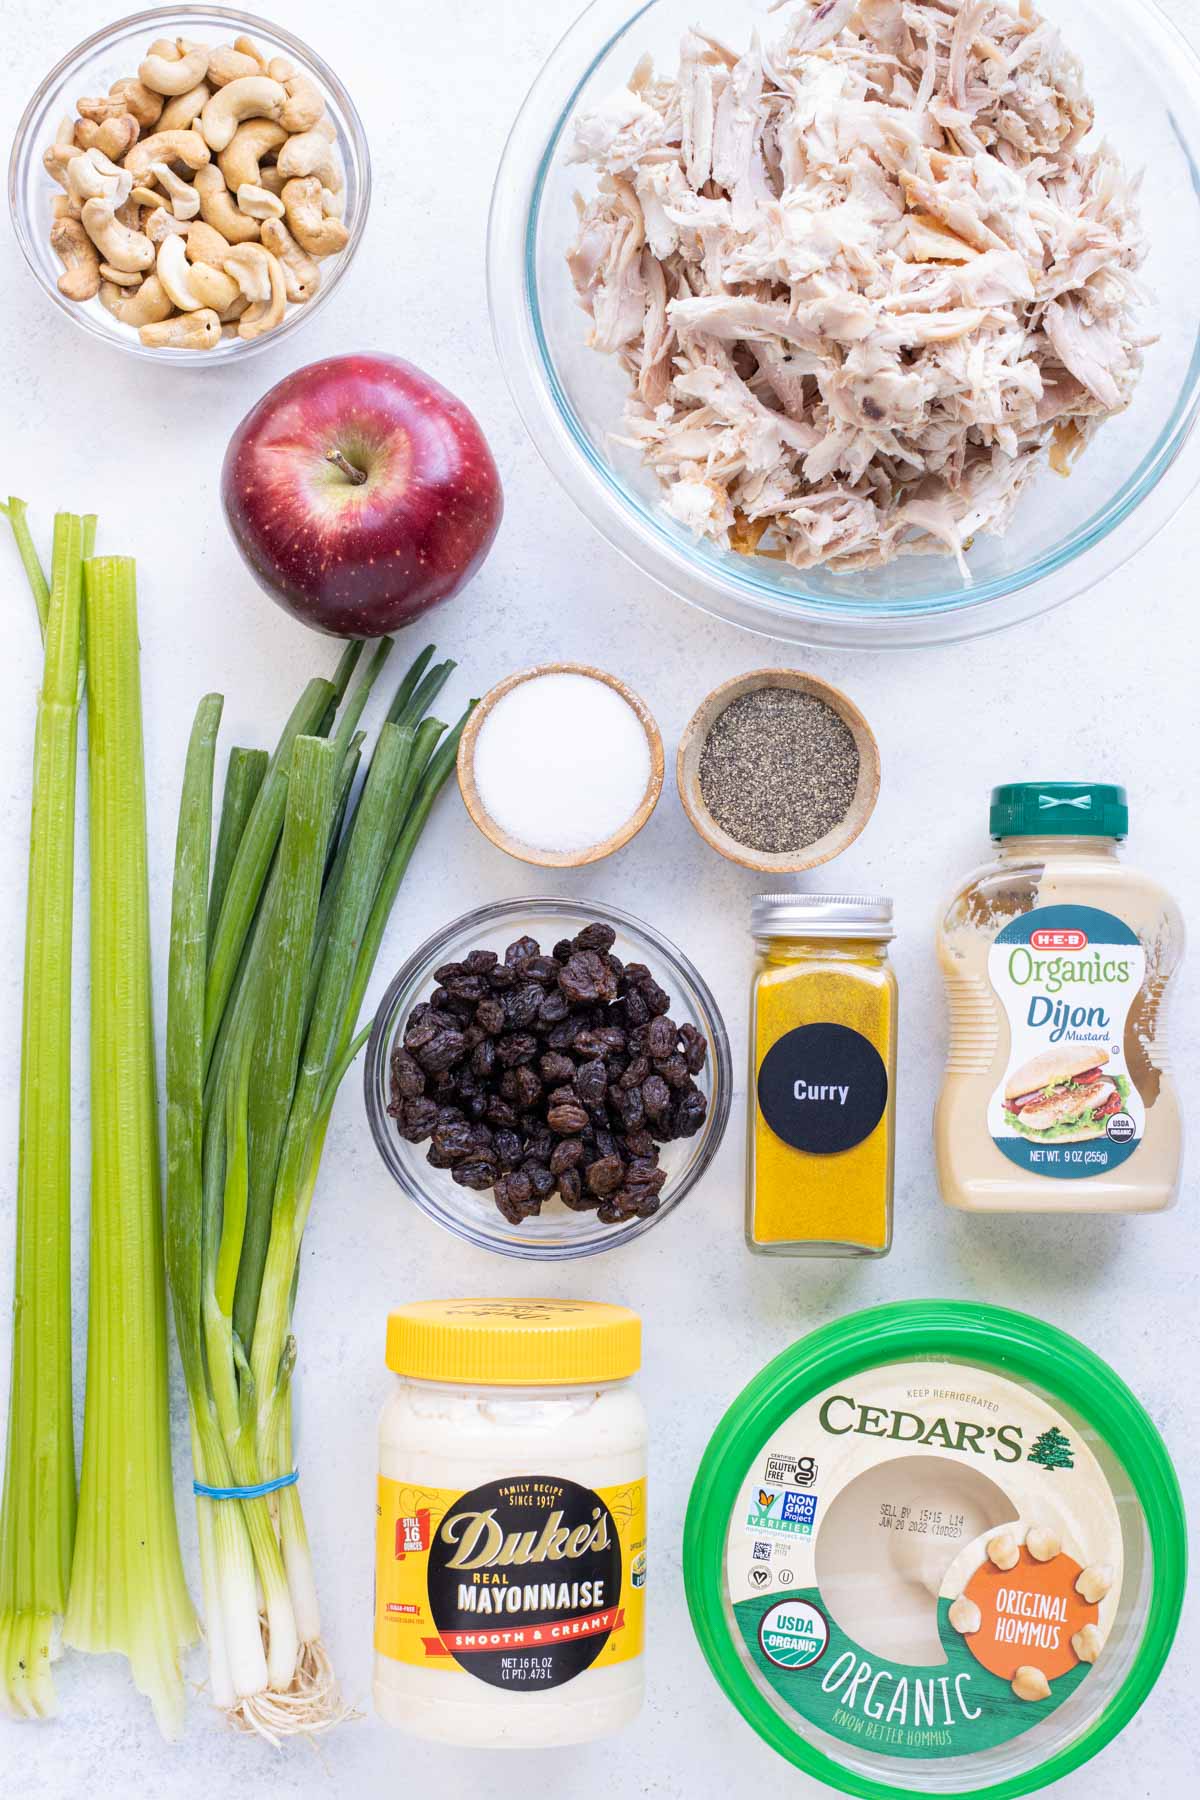 Shredded chicken, hummus, apples, green onions, celery, cashews, salt. pepper. craisins, curry powder, dijon mustard, and, mayonnaise are the ingredients for this recipe.